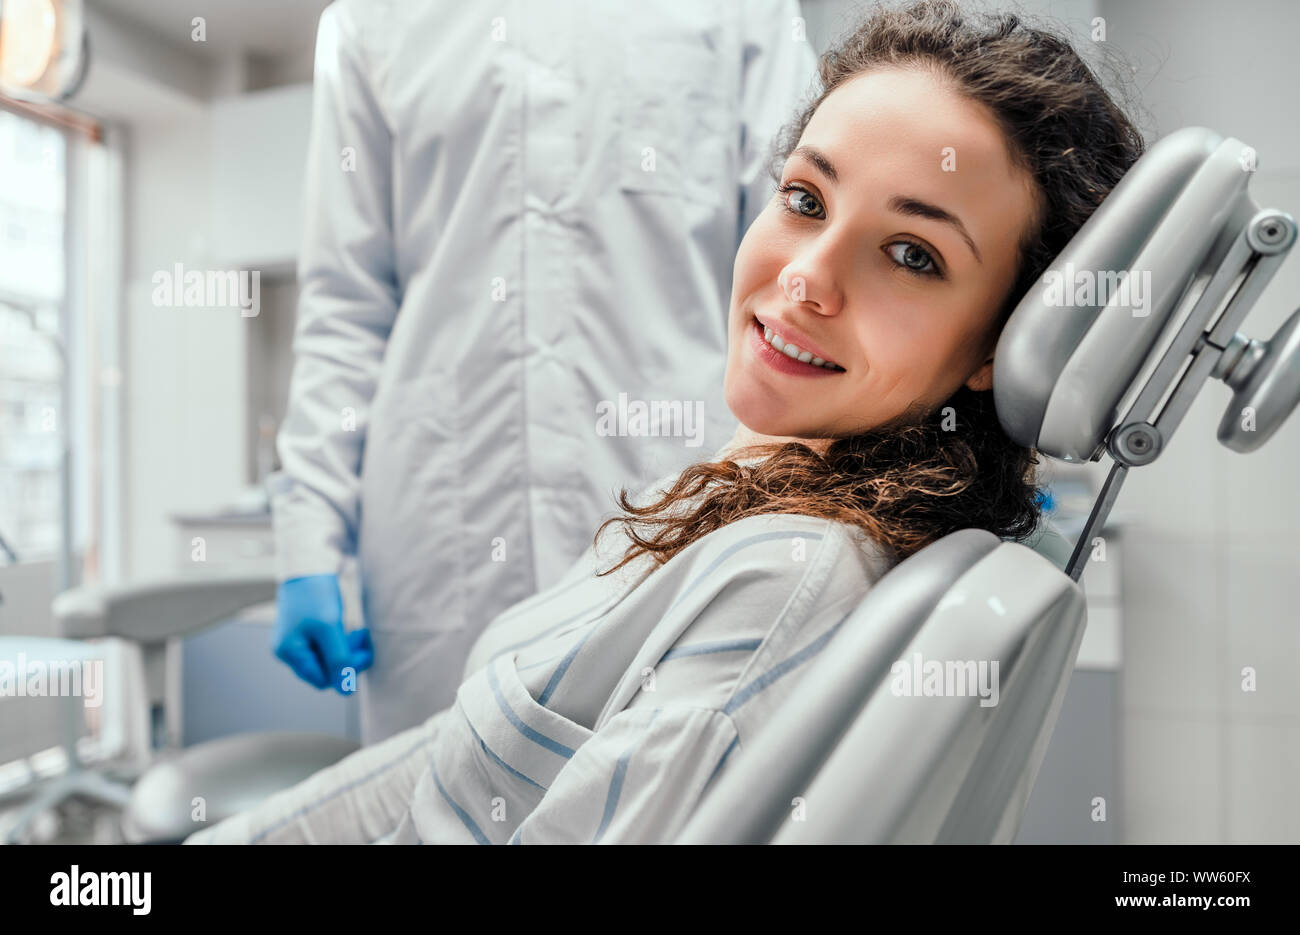 Young female patient sitting on chair in dental office. preparing for dental exam. Looking at camera. Stock Photo